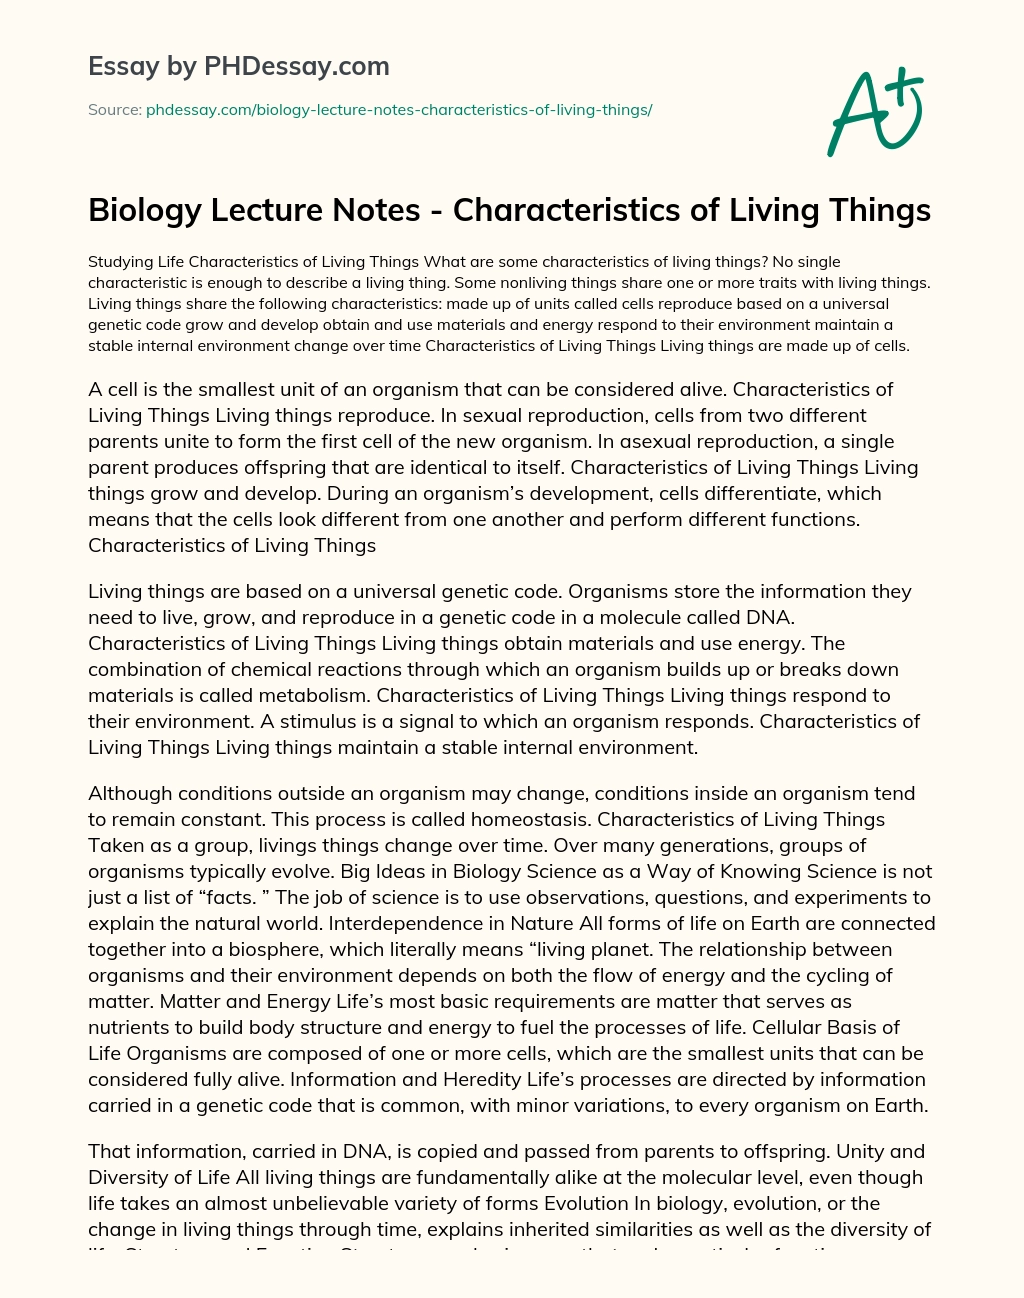 Biology Lecture Notes – Characteristics of Living Things essay